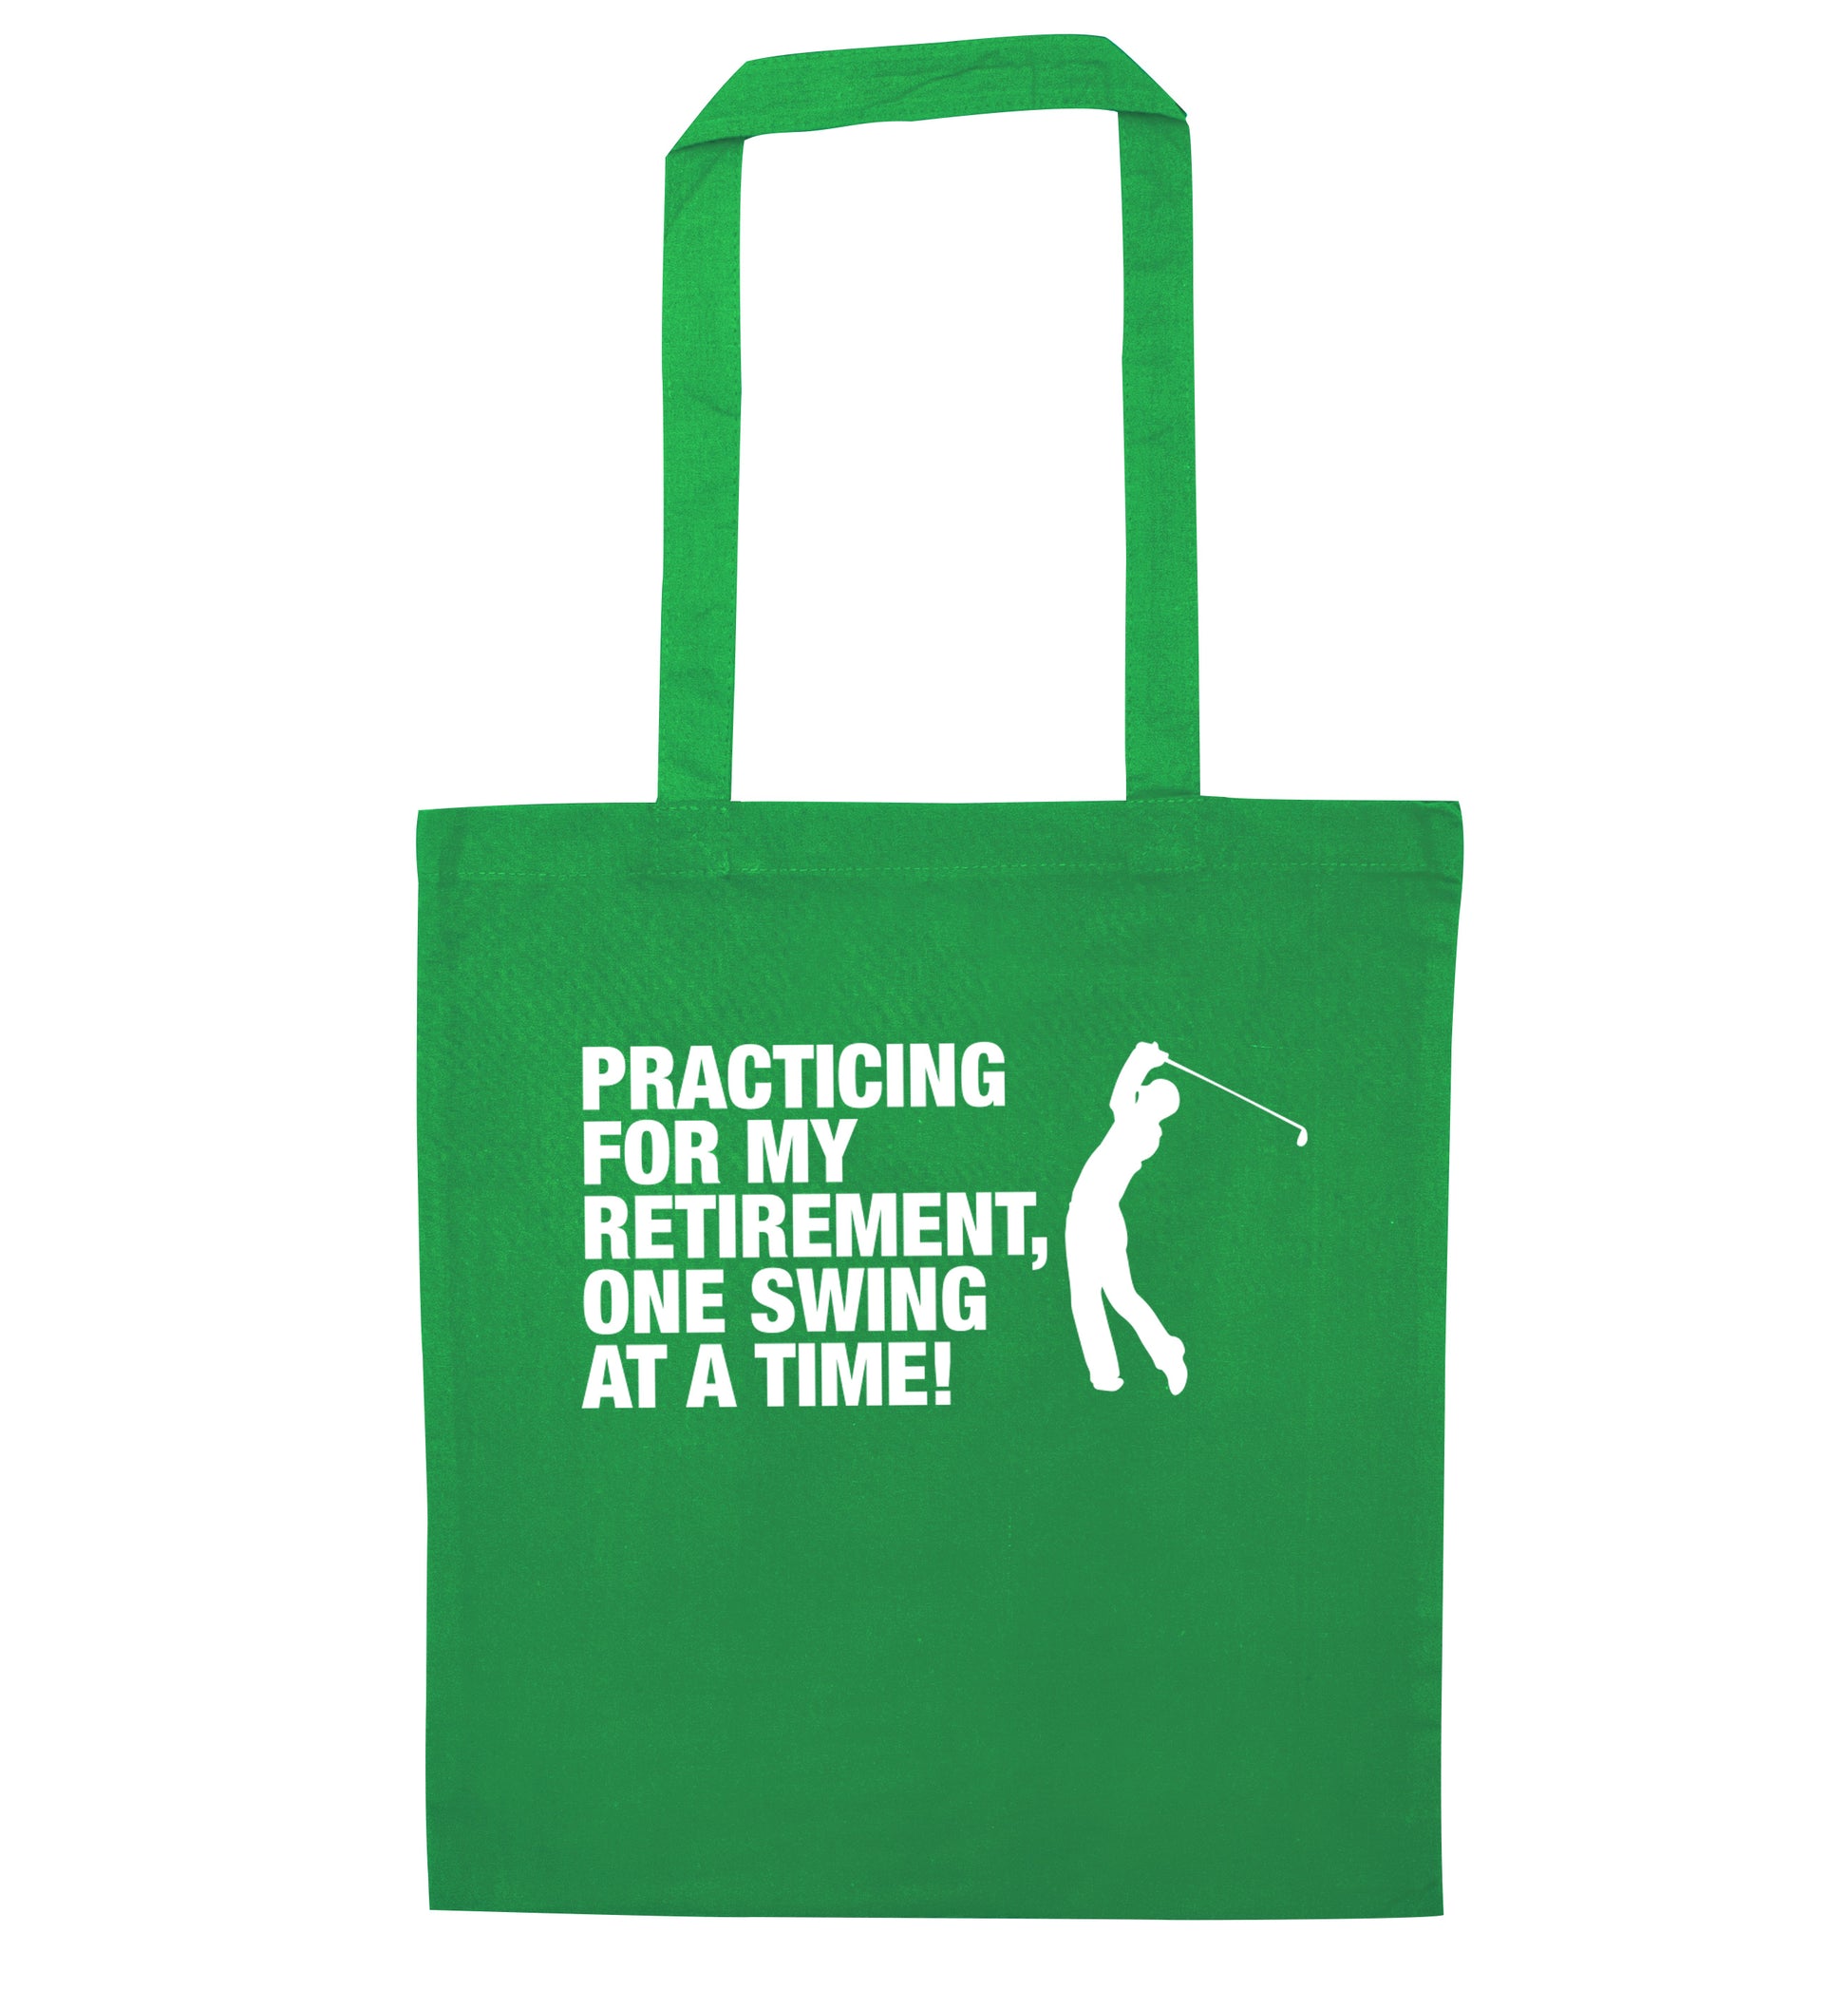 Practicing for my retirement one swing at a time green tote bag